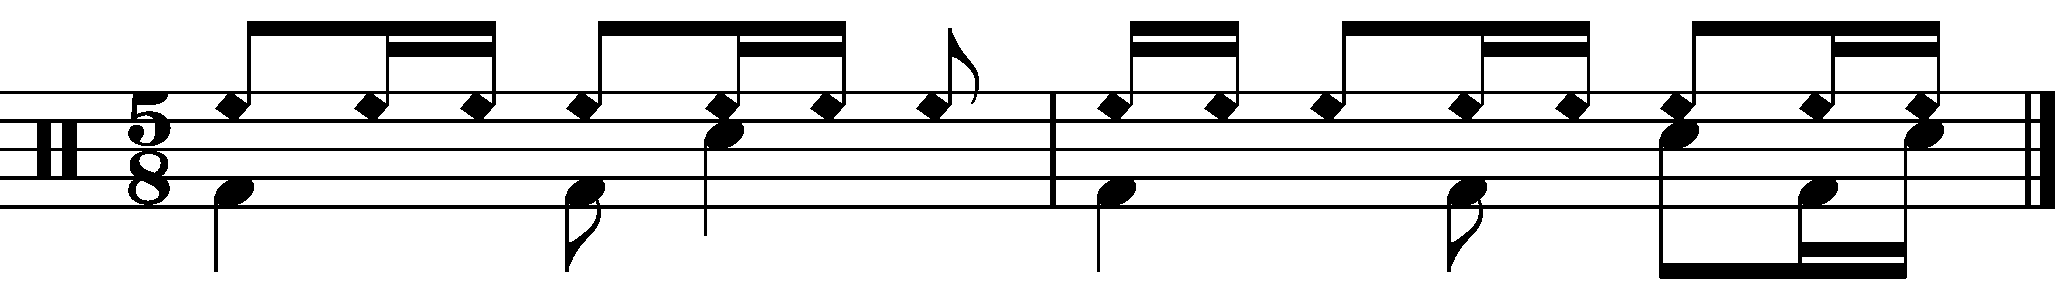 A two bar 5/8 grooves with a 1 +a right hand